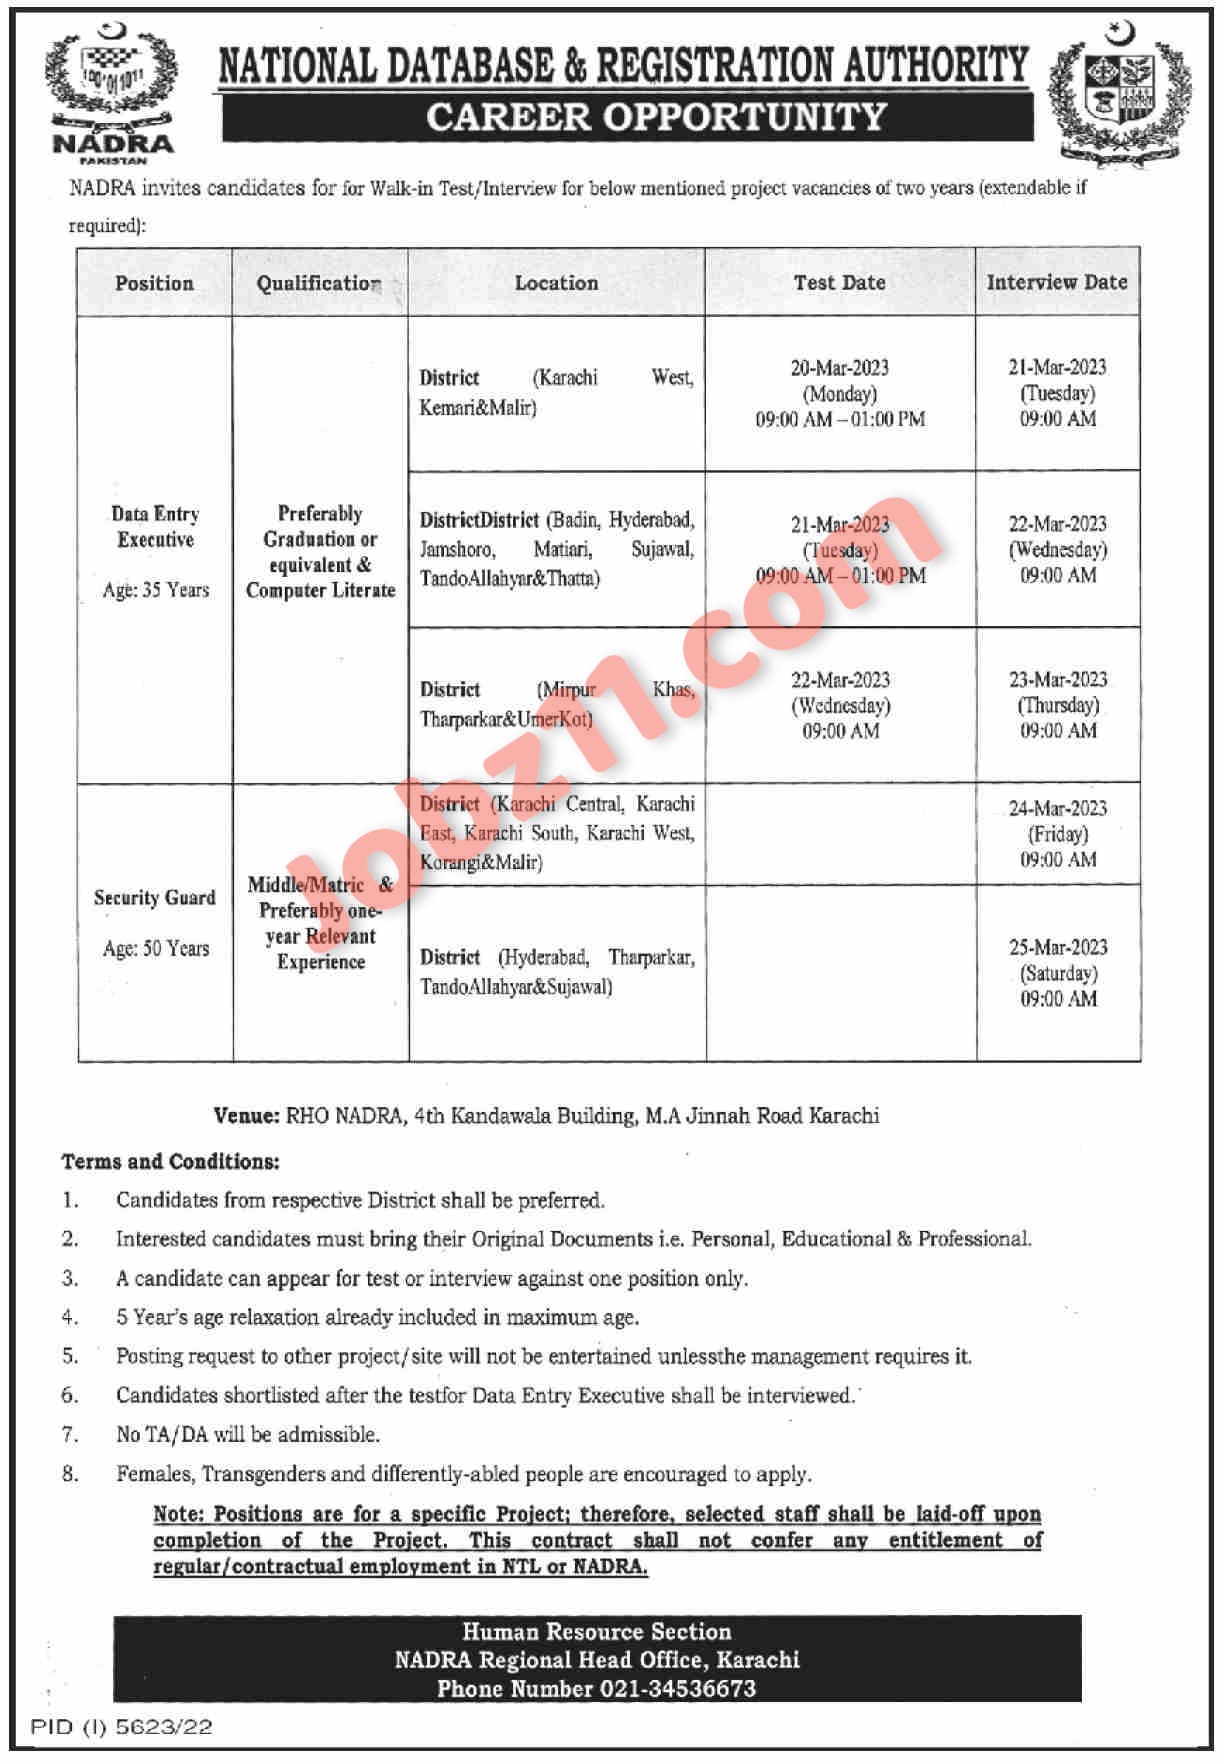 NADRA Jobs 2023 for Data Entry Executives and Security Guards